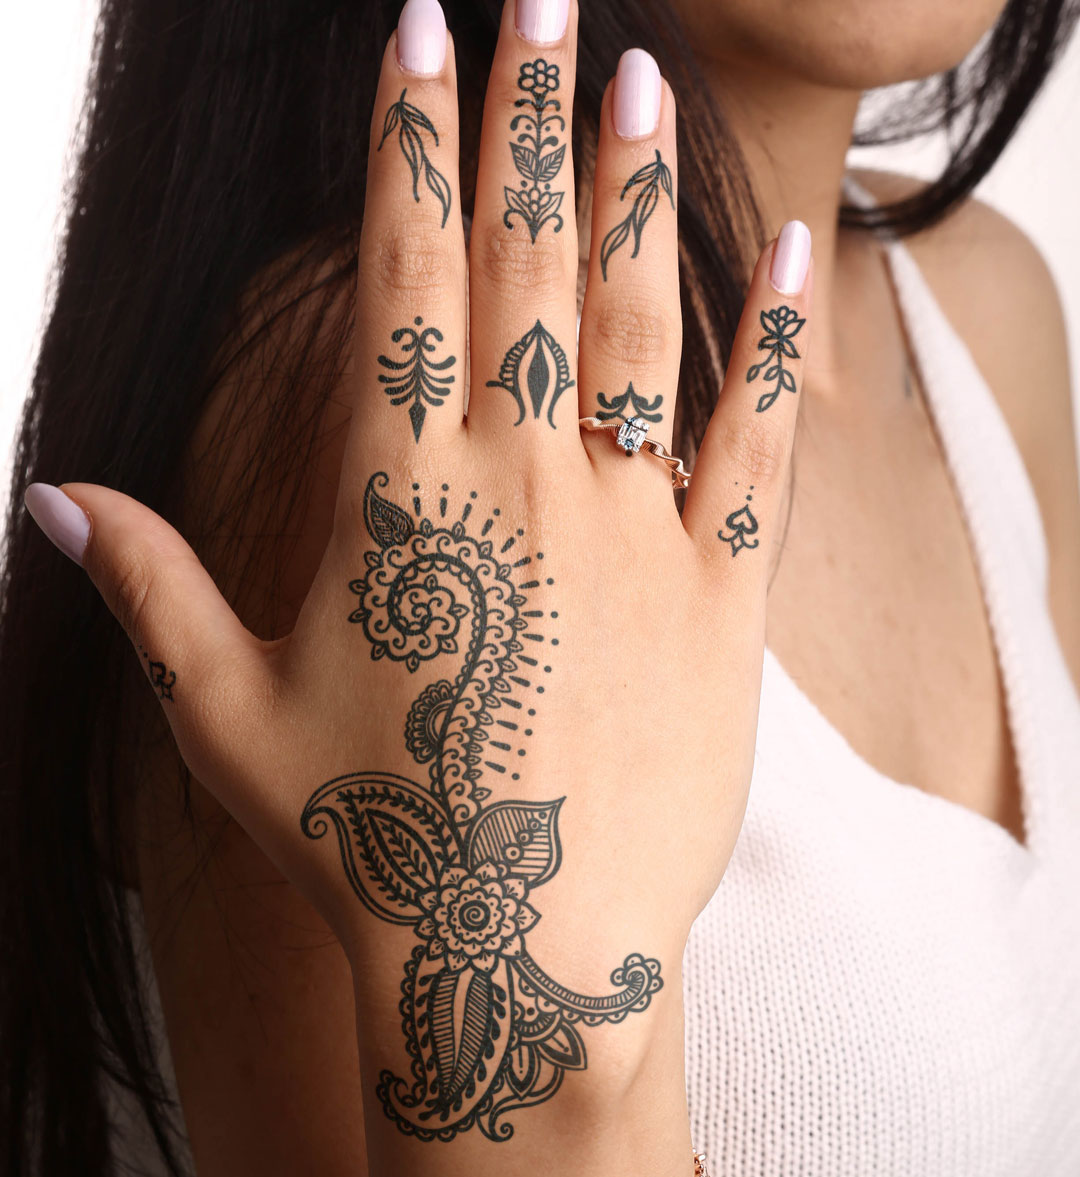 6 Ways to Remove a Temporary Tattoo Without Damaging Skin